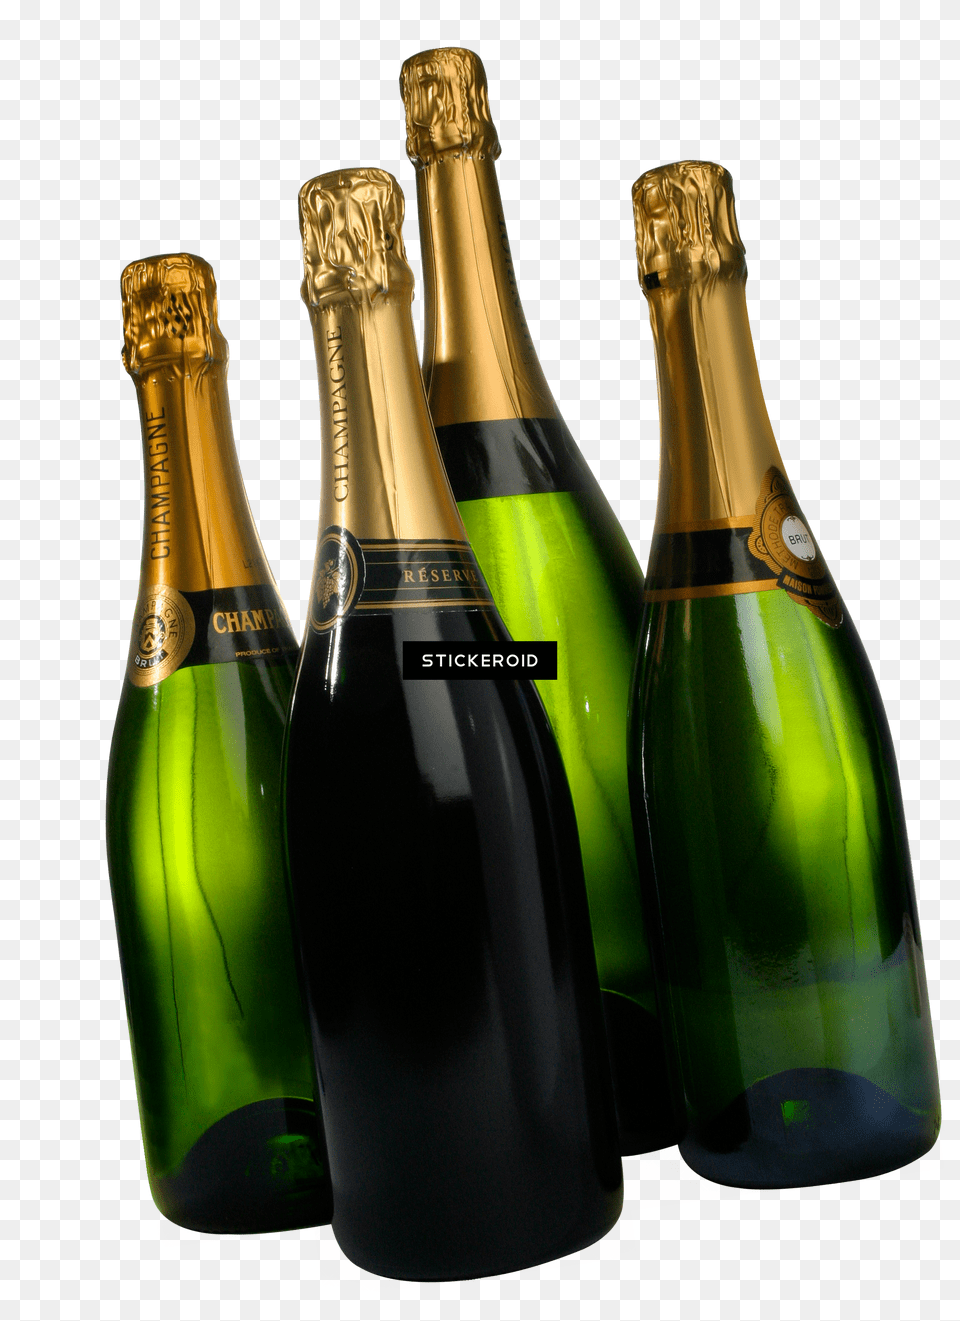 Champagne Glass Free Png Download